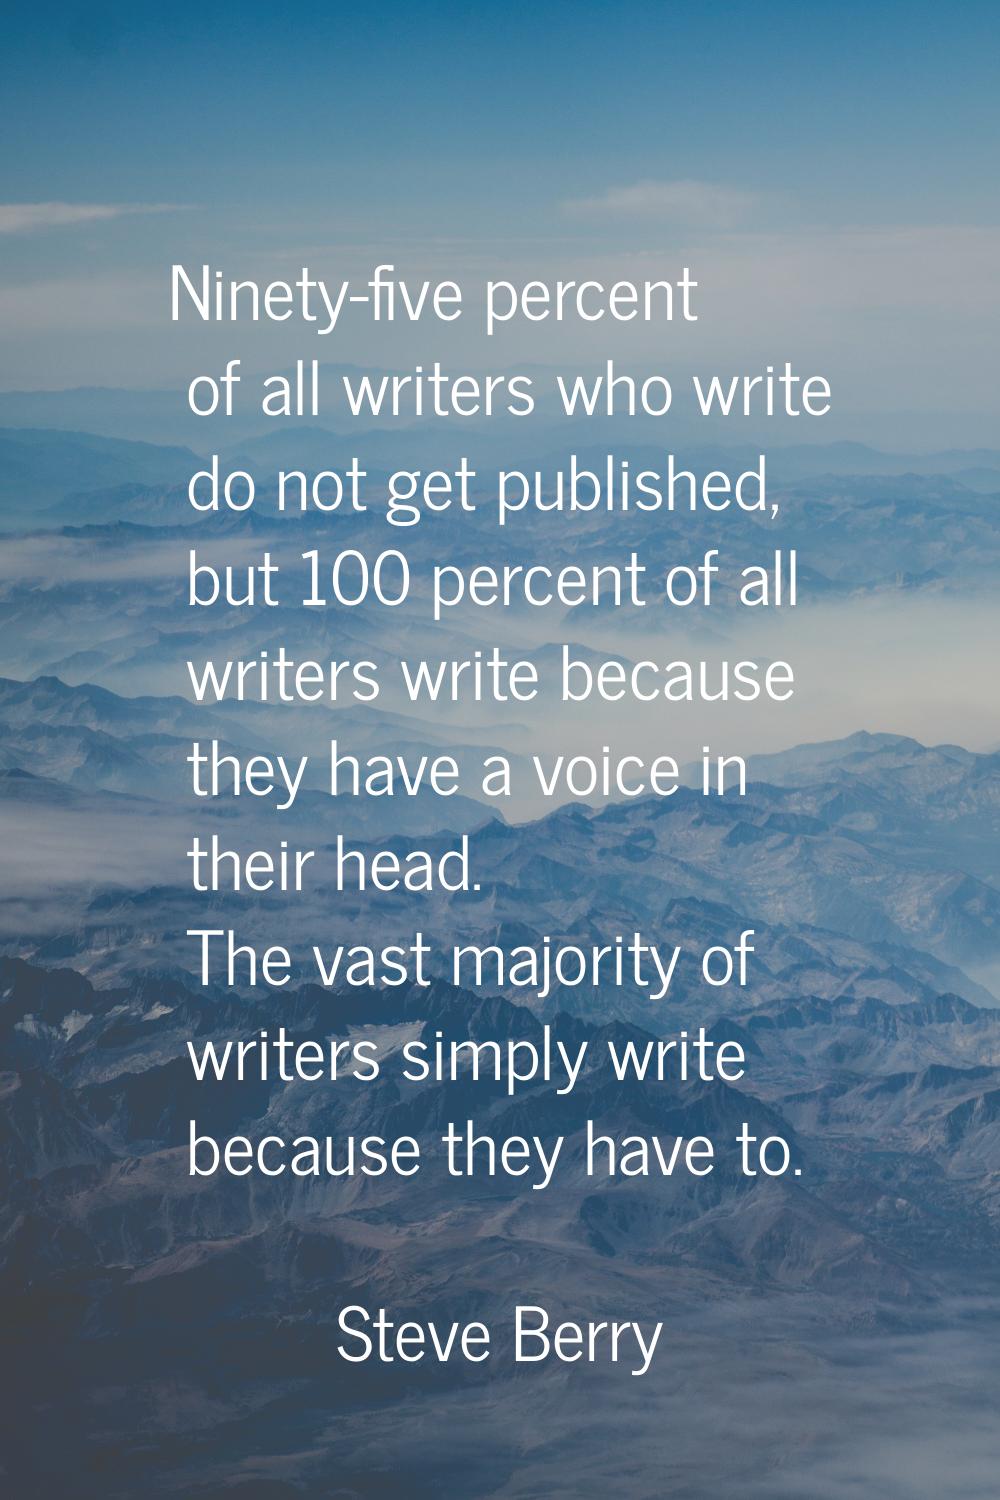 Ninety-five percent of all writers who write do not get published, but 100 percent of all writers w